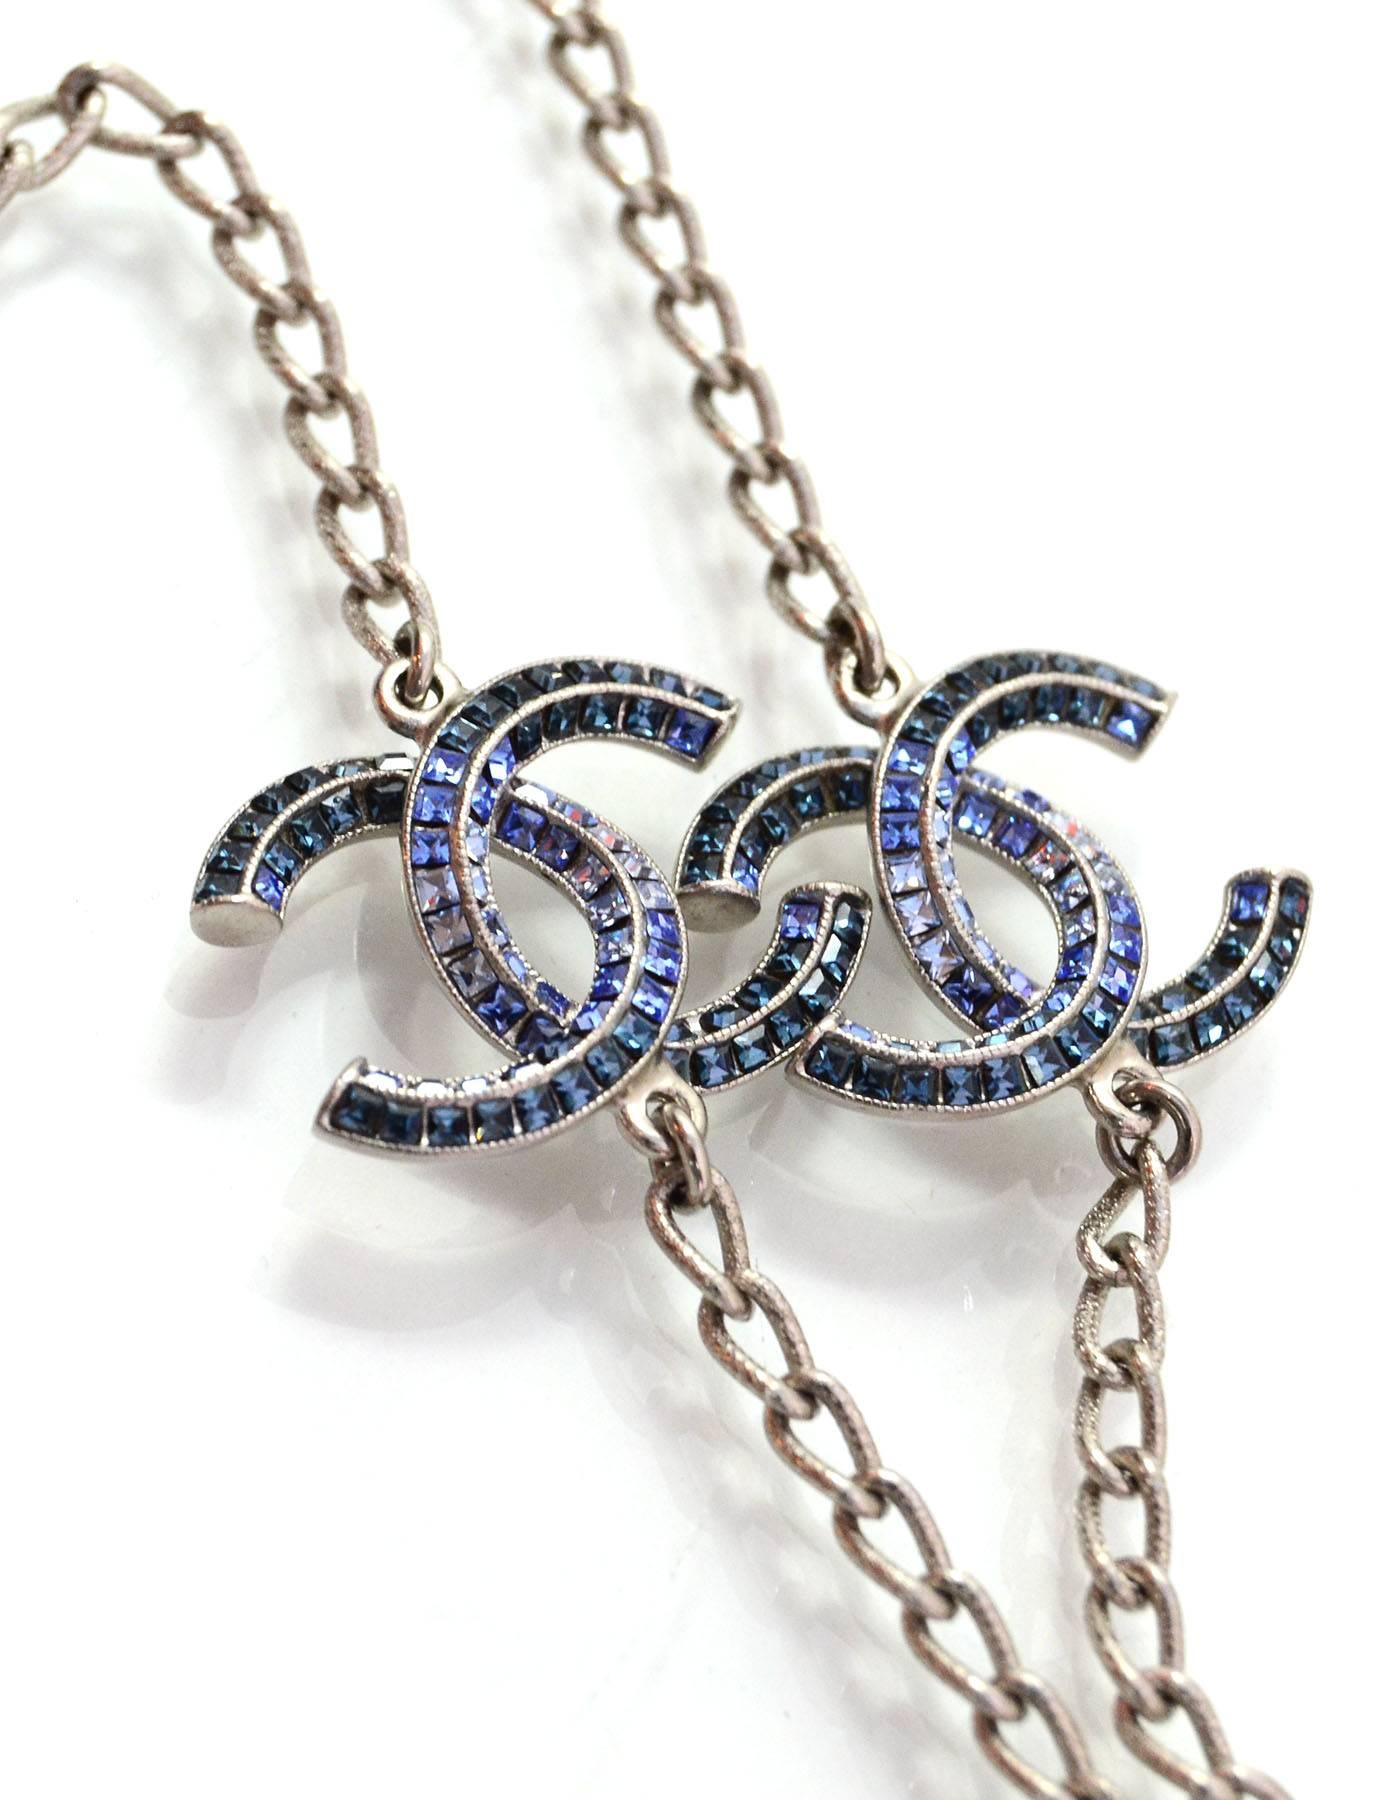 100% Authentic Chanel Long Silver Chain Link & Crystal CC Necklace.  Two CC Pendants feature blue ombre baguette crystals.

Made In: France
Year of Production: 2015
Color: Silvertone, green and blue
Materials: Metaland crystal
Closure: Lobster claw